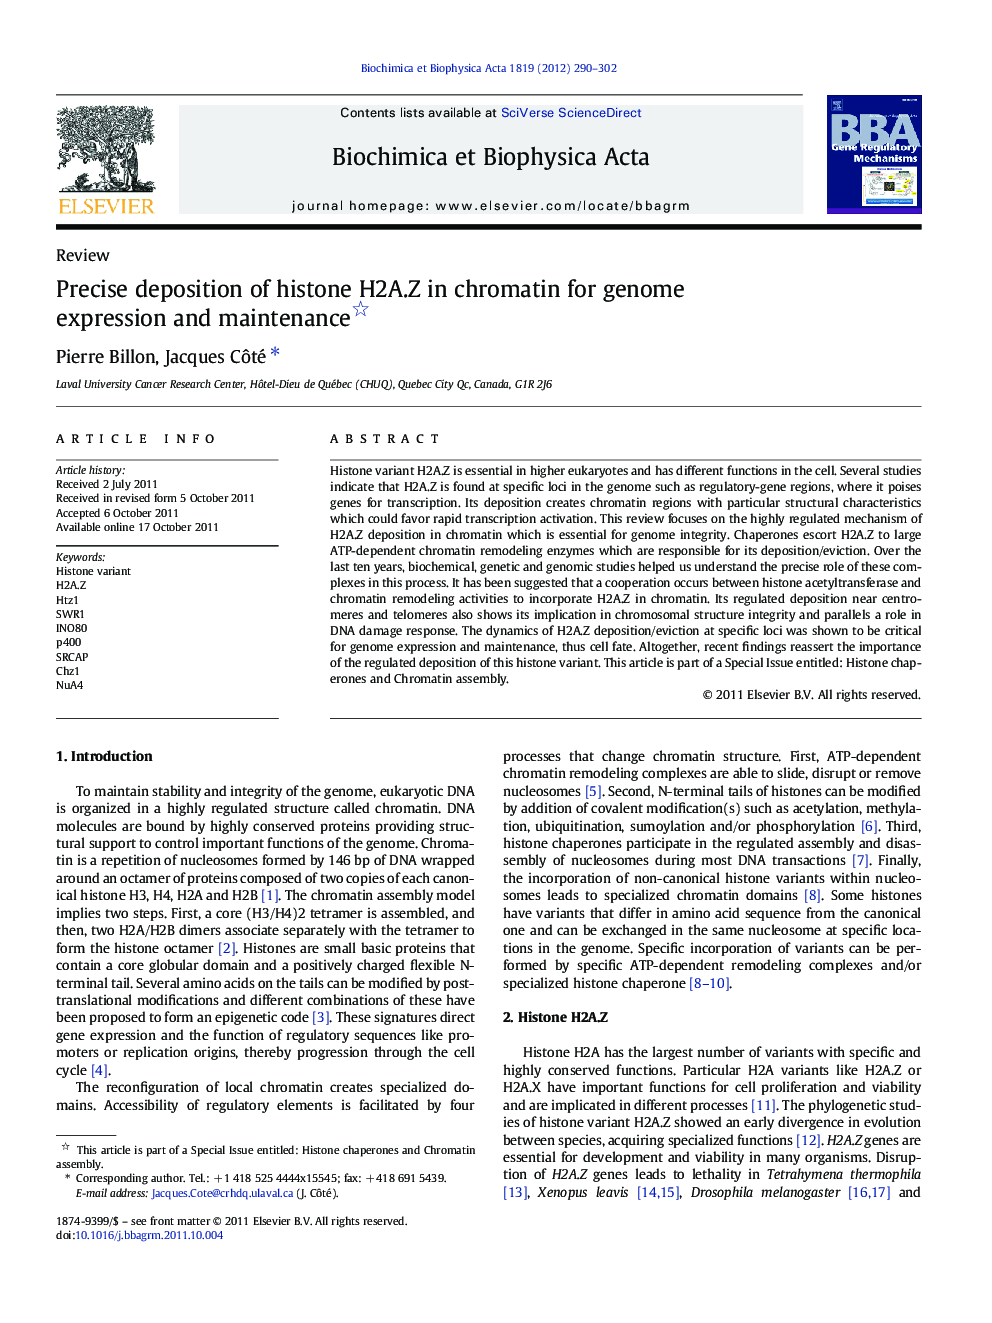 Precise deposition of histone H2A.Z in chromatin for genome expression and maintenance 